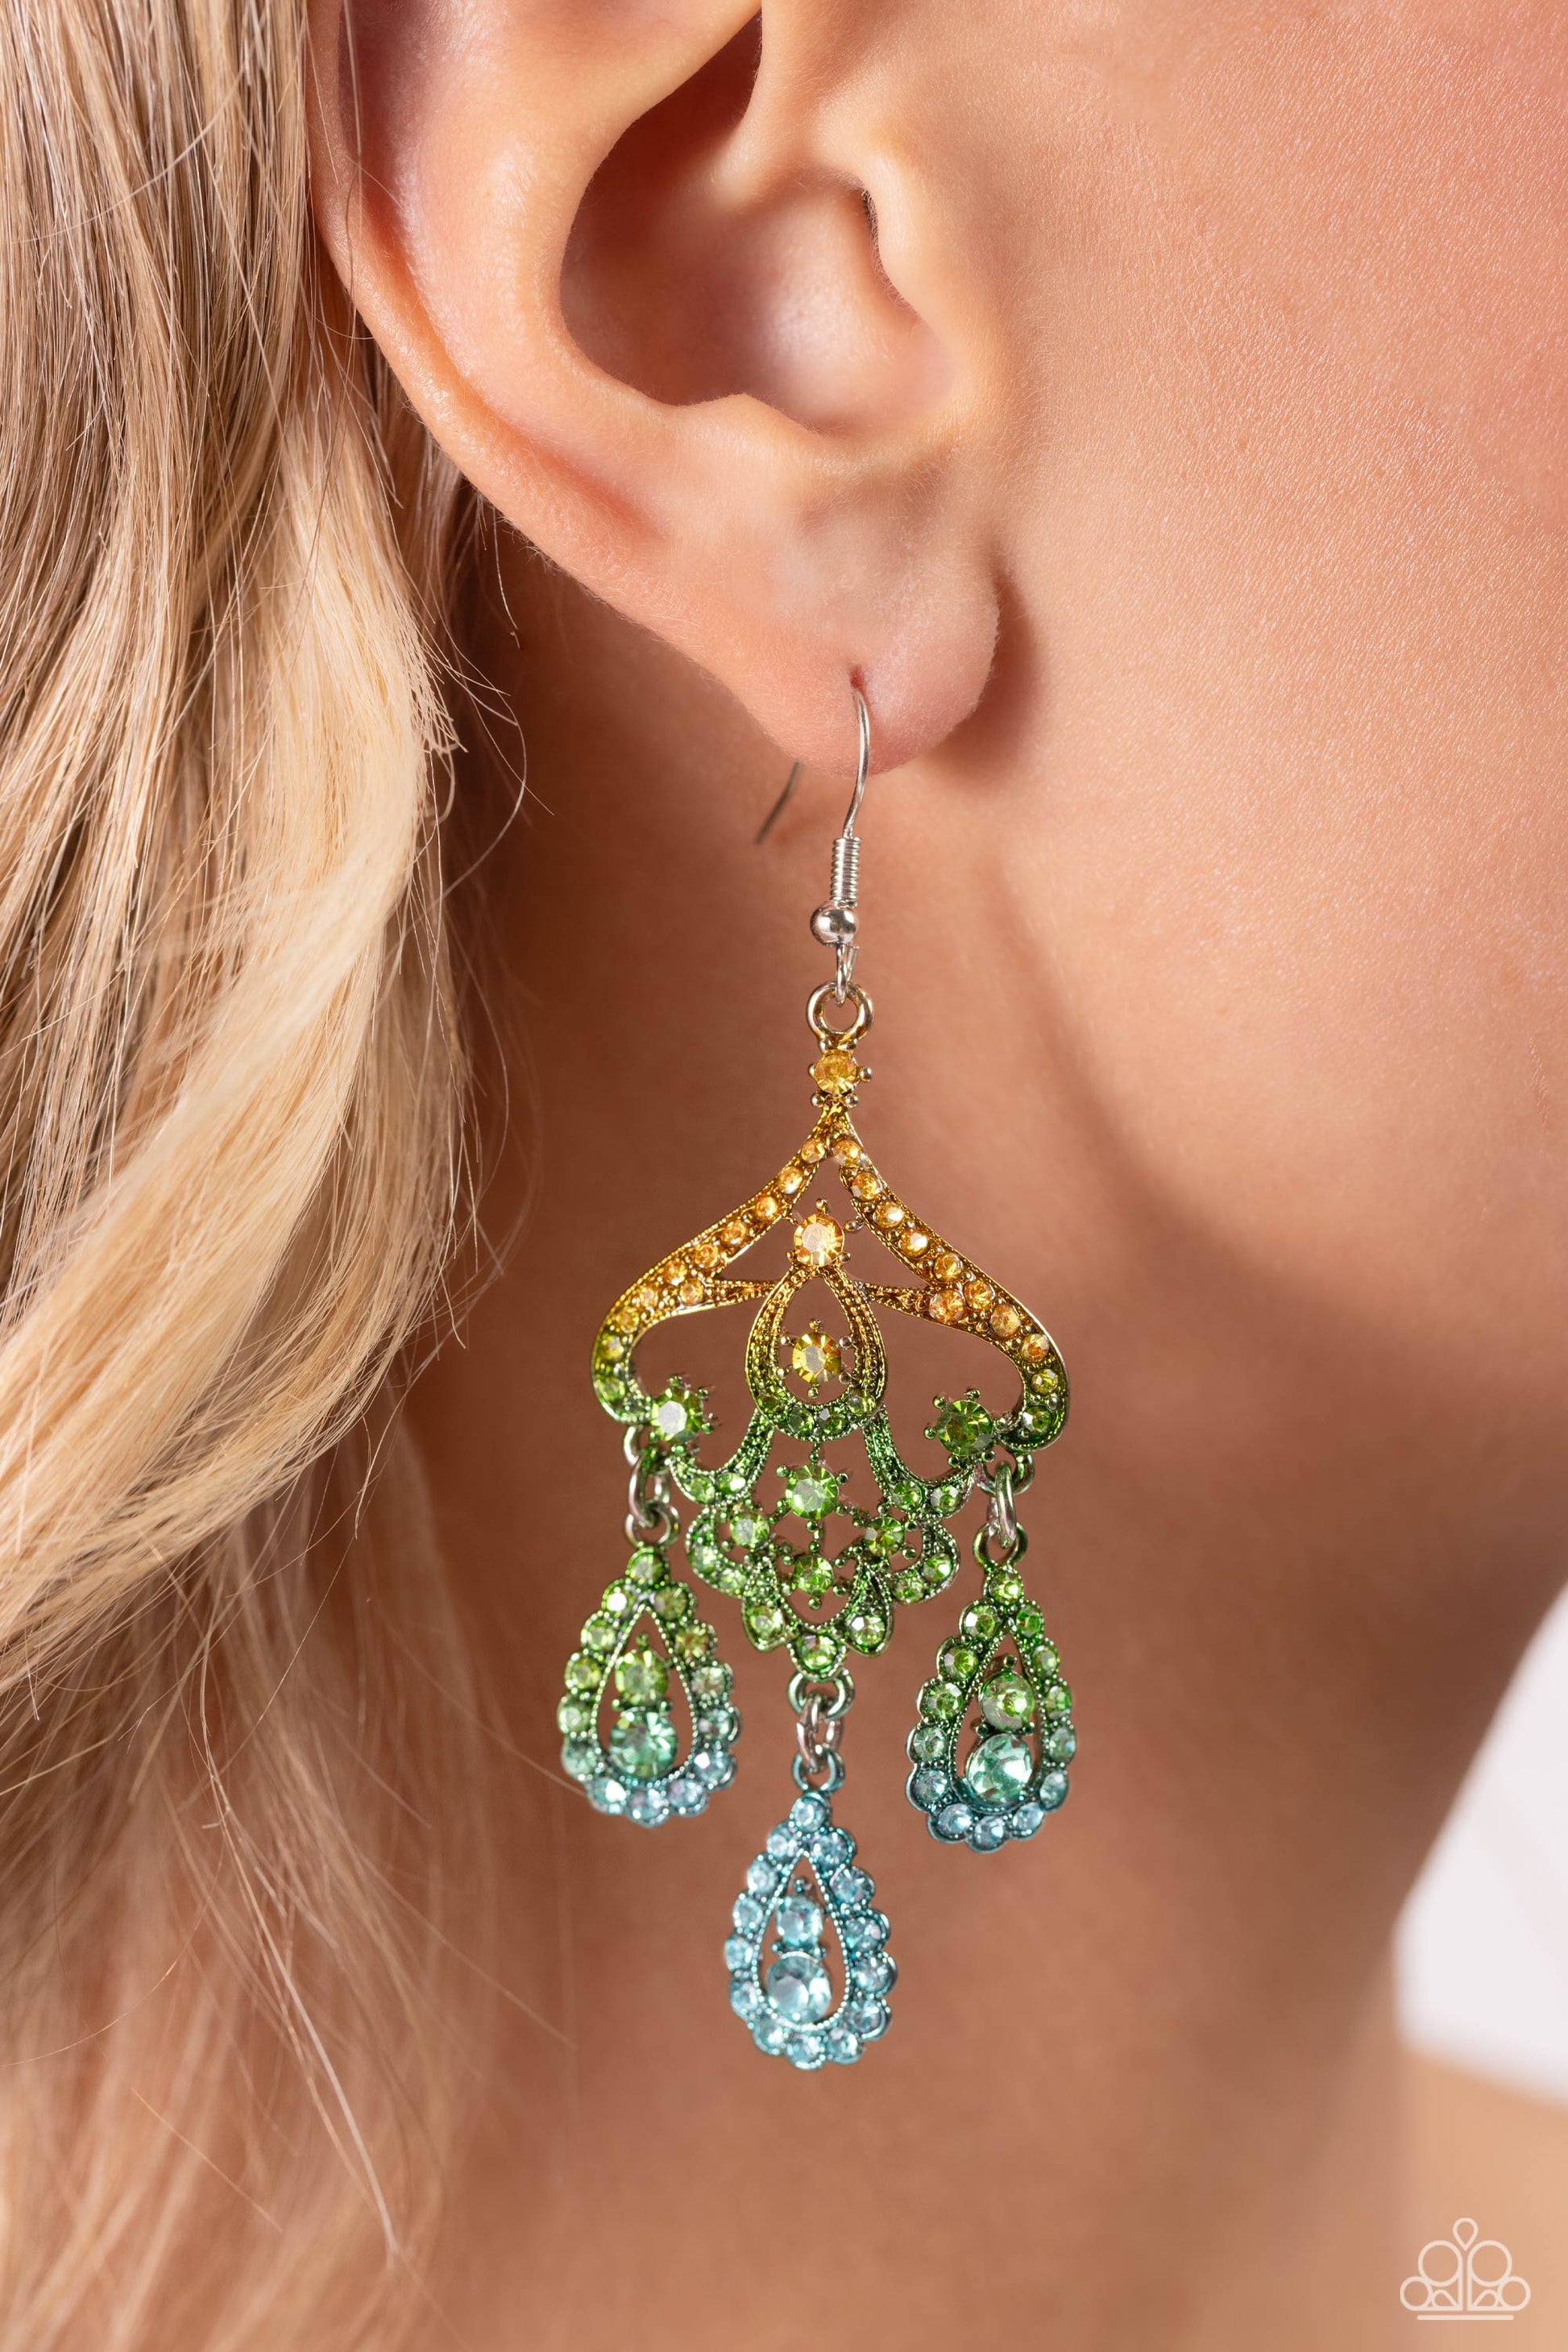 Chandelier Command Multi Earring - Paparazzi Accessories  Three rhinestone-encrusted teardrops drip from the bottom of an ornate decorative frame, creating an elegant fringe. The decorative frame swirls with ombré rhinestones that go from yellow to green to blue shades in varying sizes for a timelessly over-the-top sparkle. Earring attaches to a standard fishhook fitting.  Sold as one pair of earrings.  P5SE-MTXX-172XX